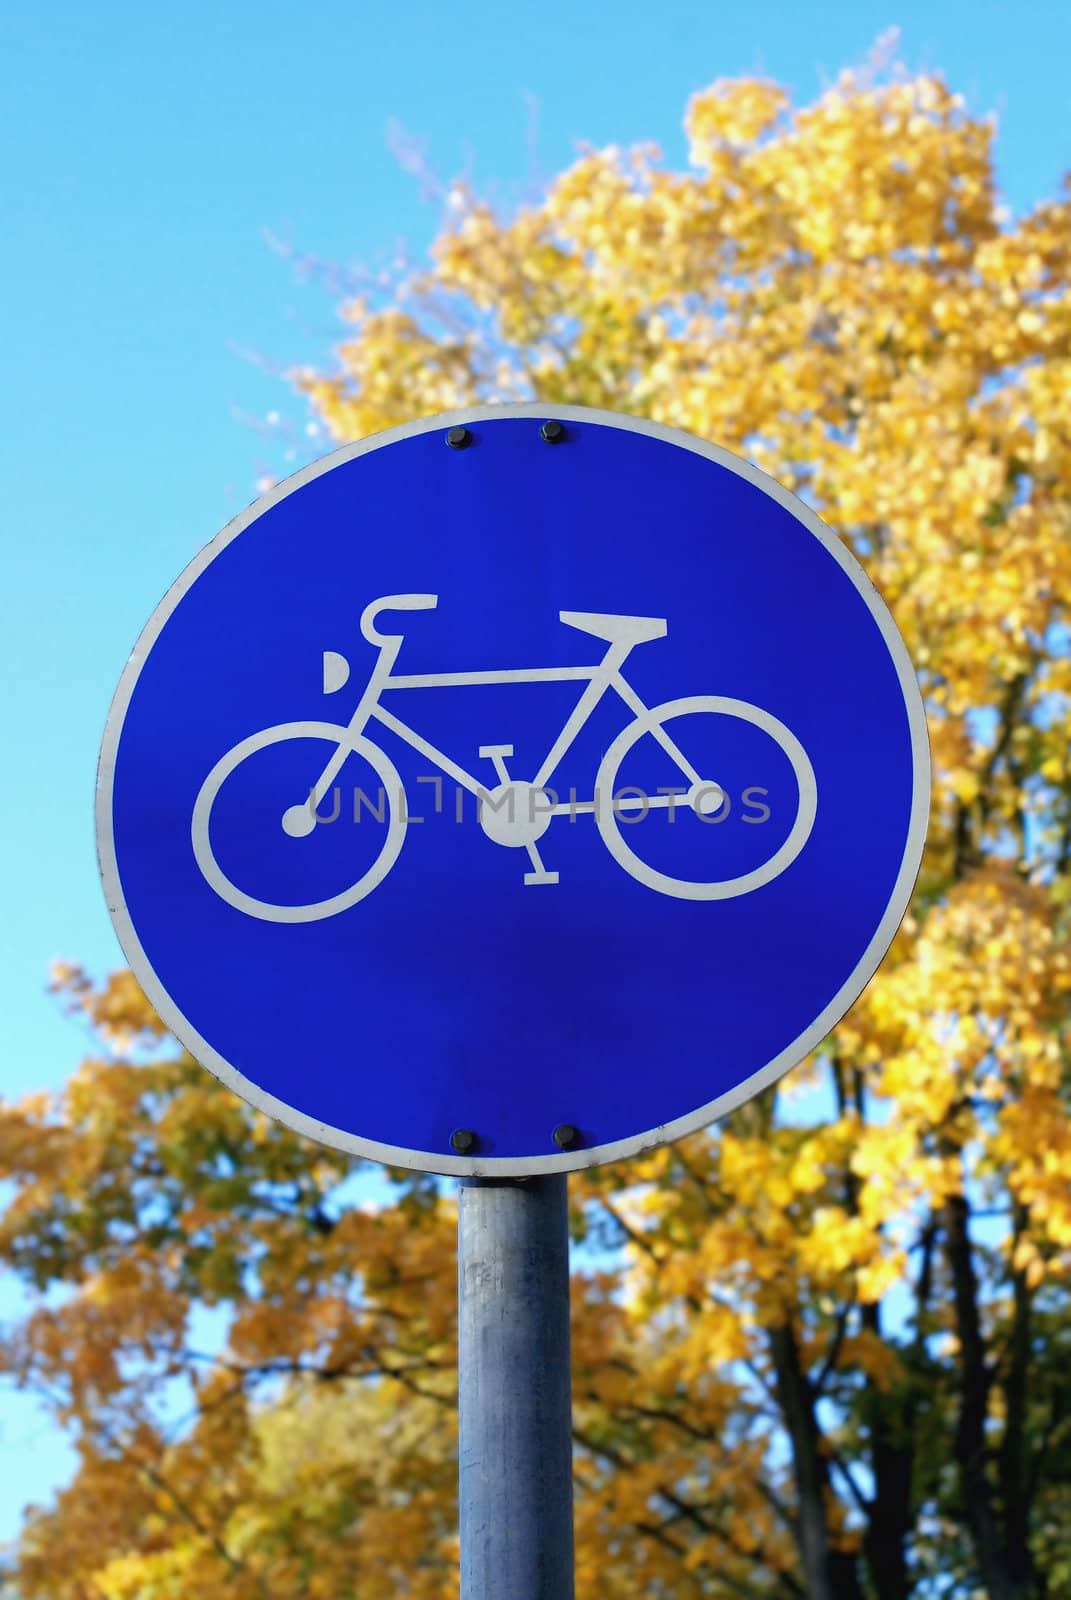 Sign showing bike on background of blue sky and yellow trees in Germany